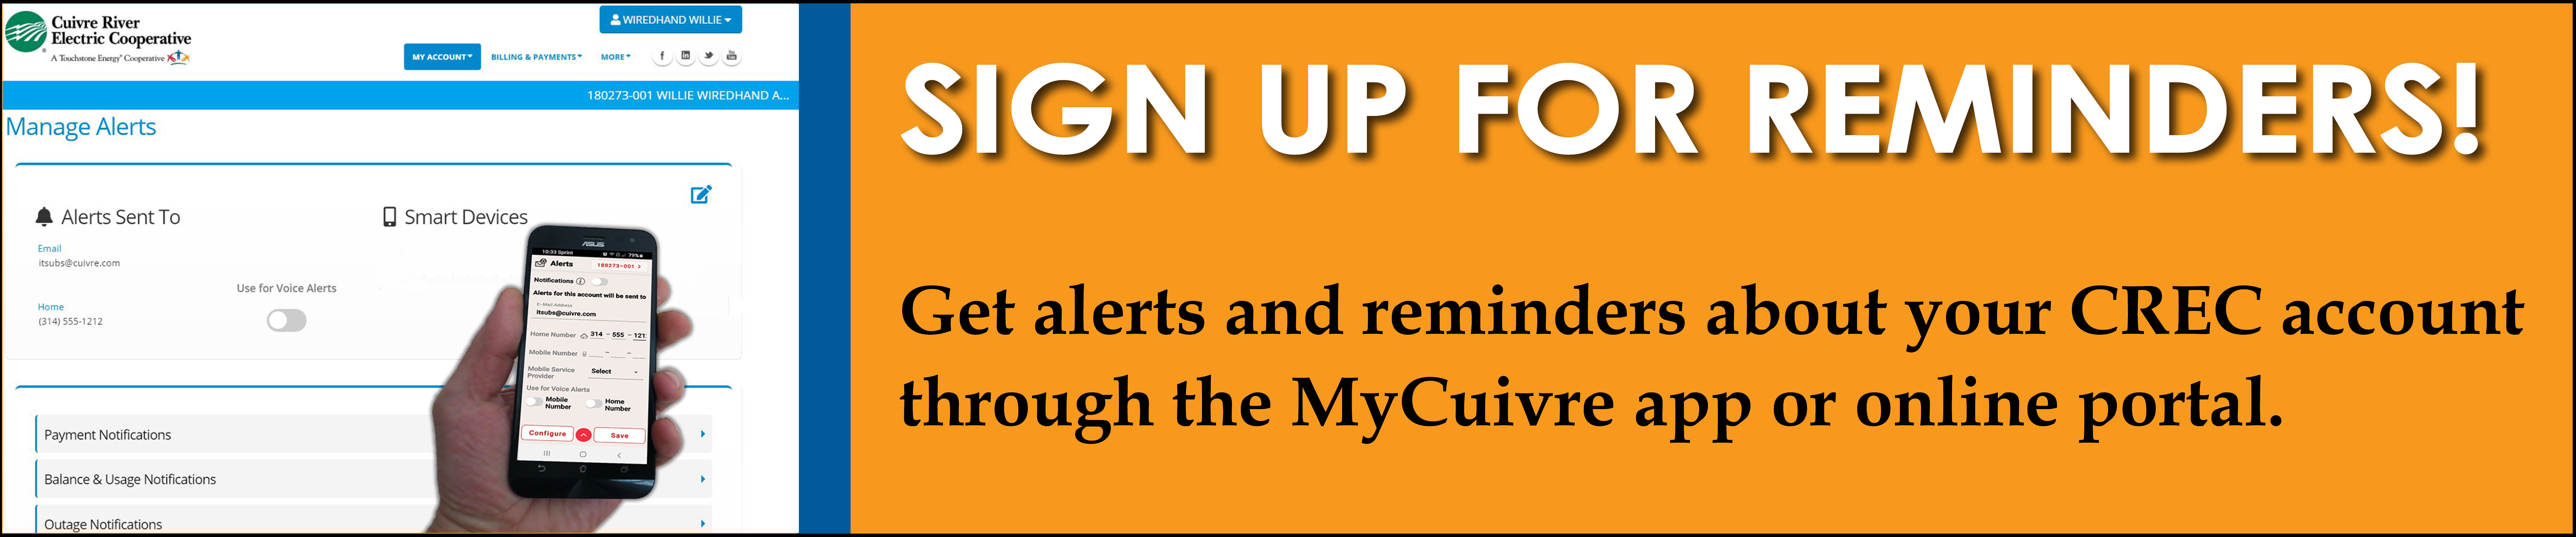 Did you know you could receive account alerts through the MyCuivre App? Click here to learn more.